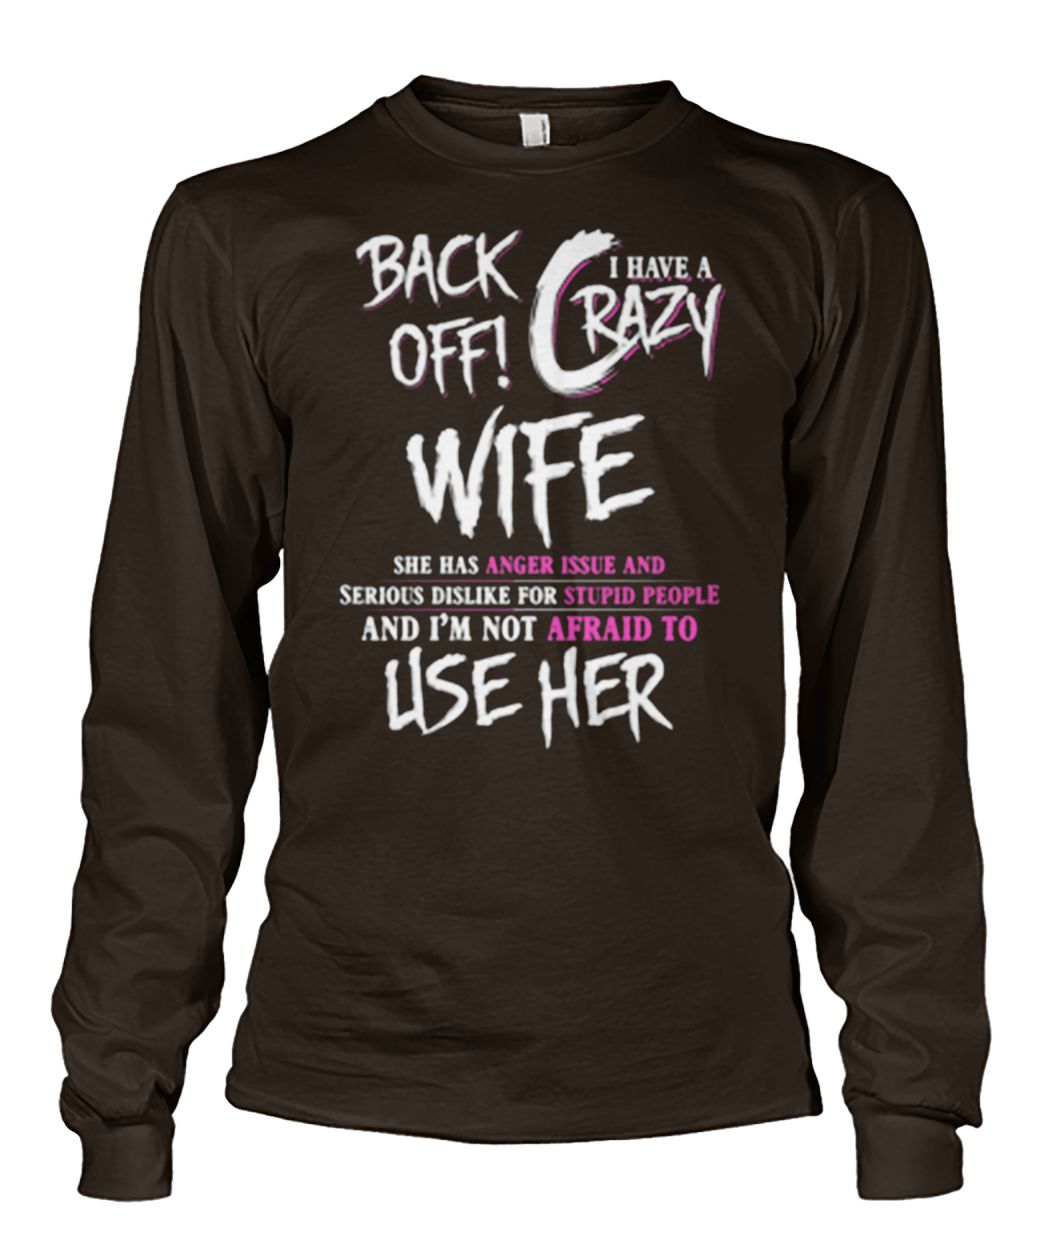 Back off I have a crazy sister she has anger issues unisex long sleeve